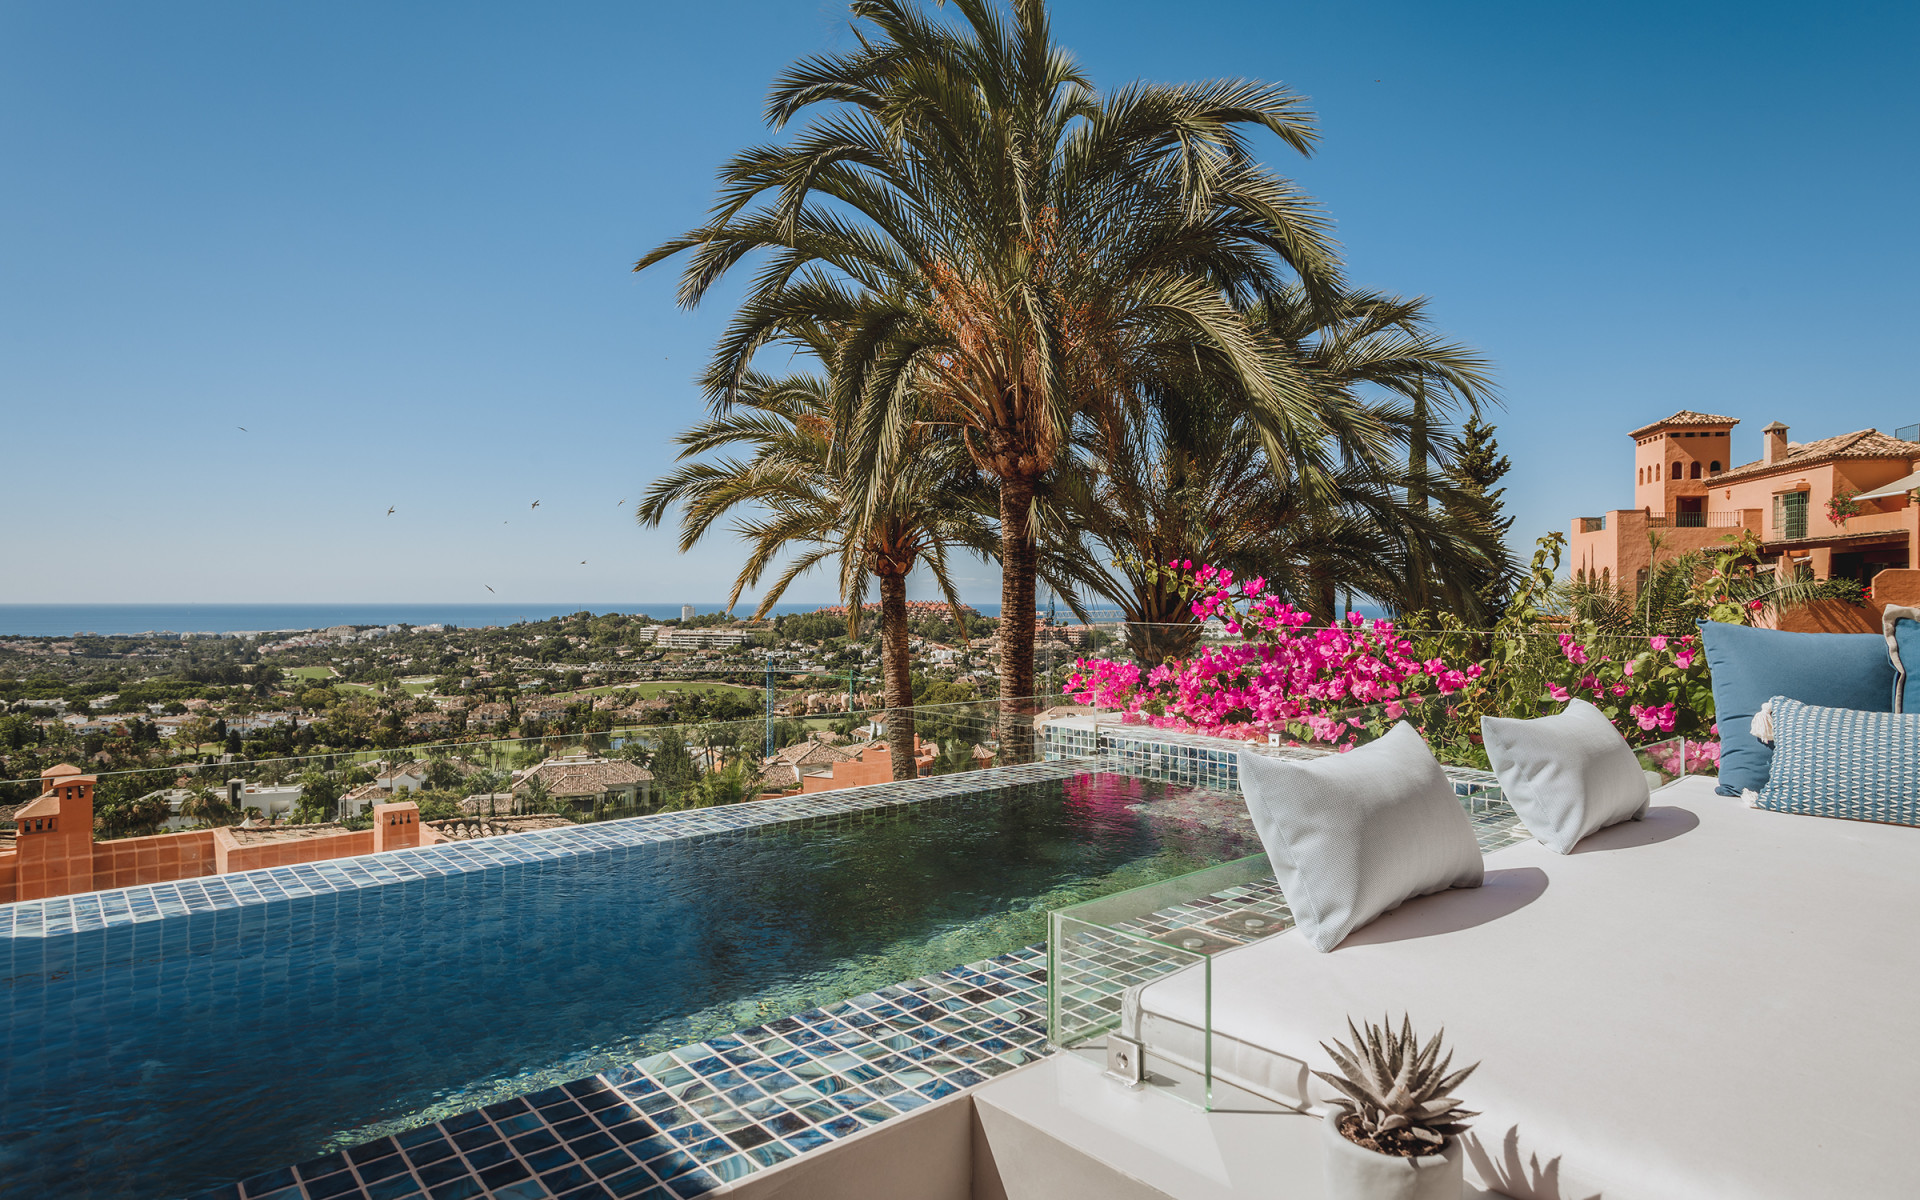 Duplex Penthouse for sale in <i>Les Belvederes, </i>Nueva Andalucia